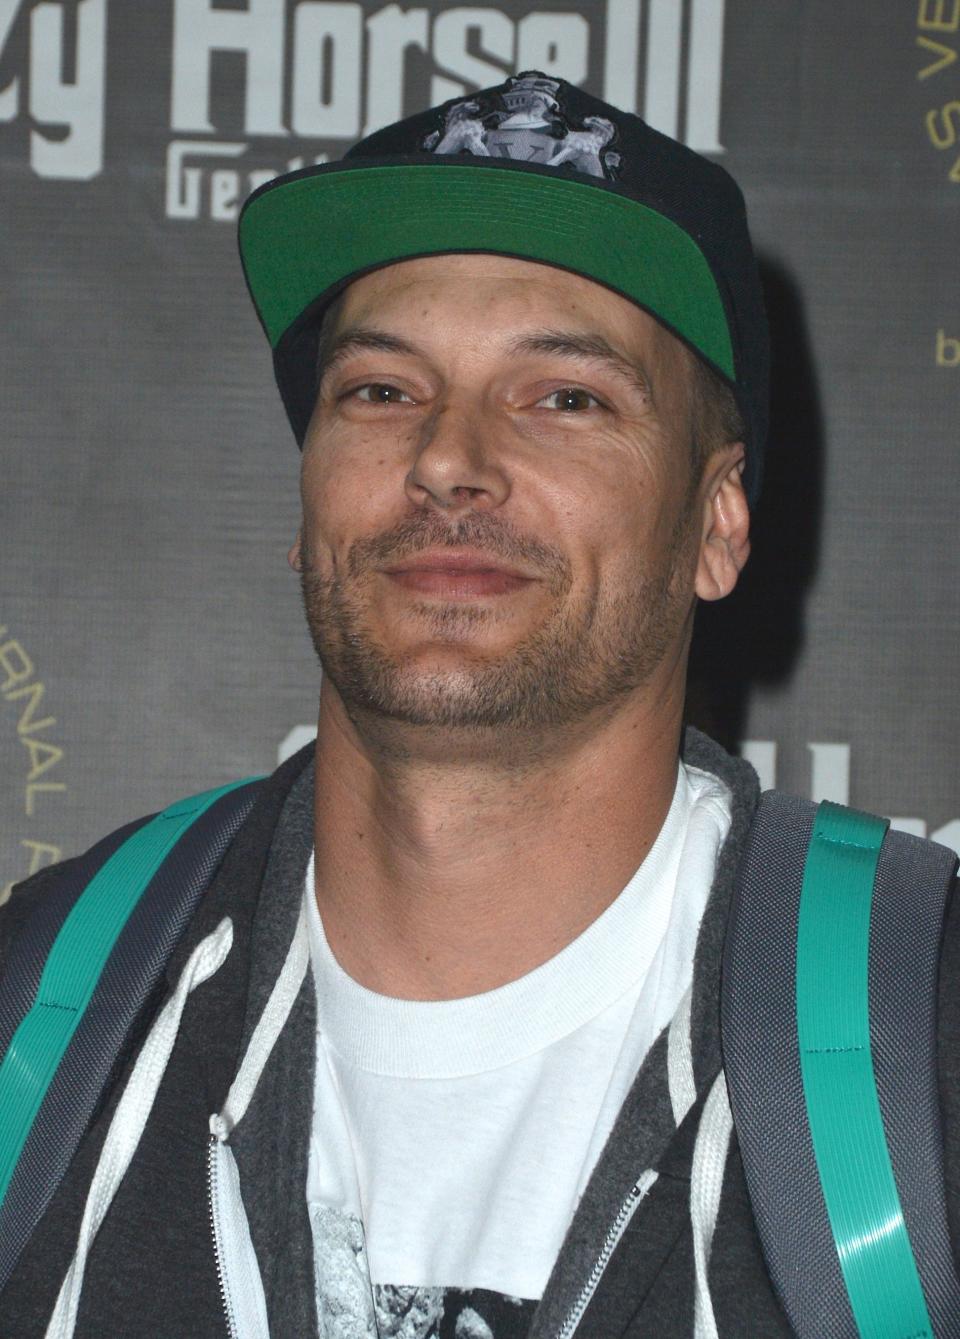 Kevin Federline arrives at the Crazy Horse III Gentlemen's Club to celebrate his birthday on March 12, 2016 in Las Vegas, Nevada